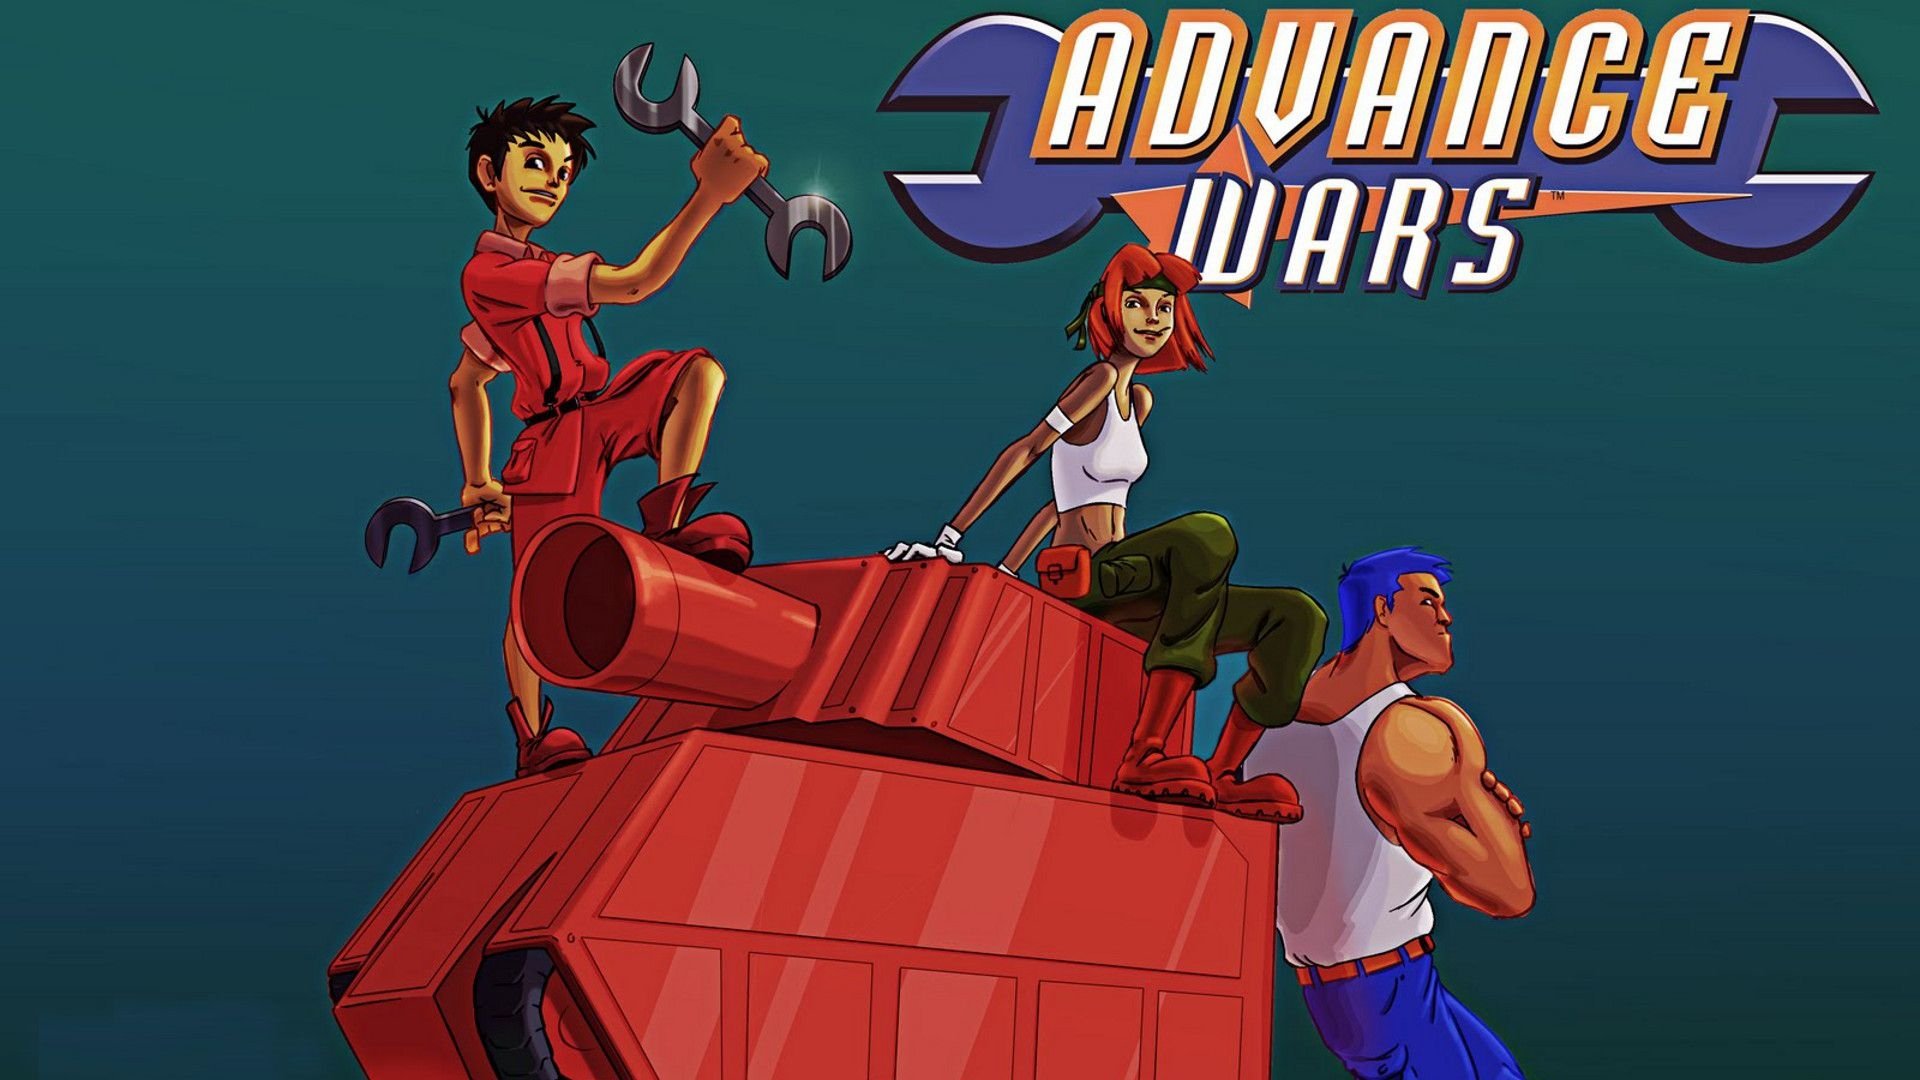 Andy Advance Wars HD Wallpaper Background Image